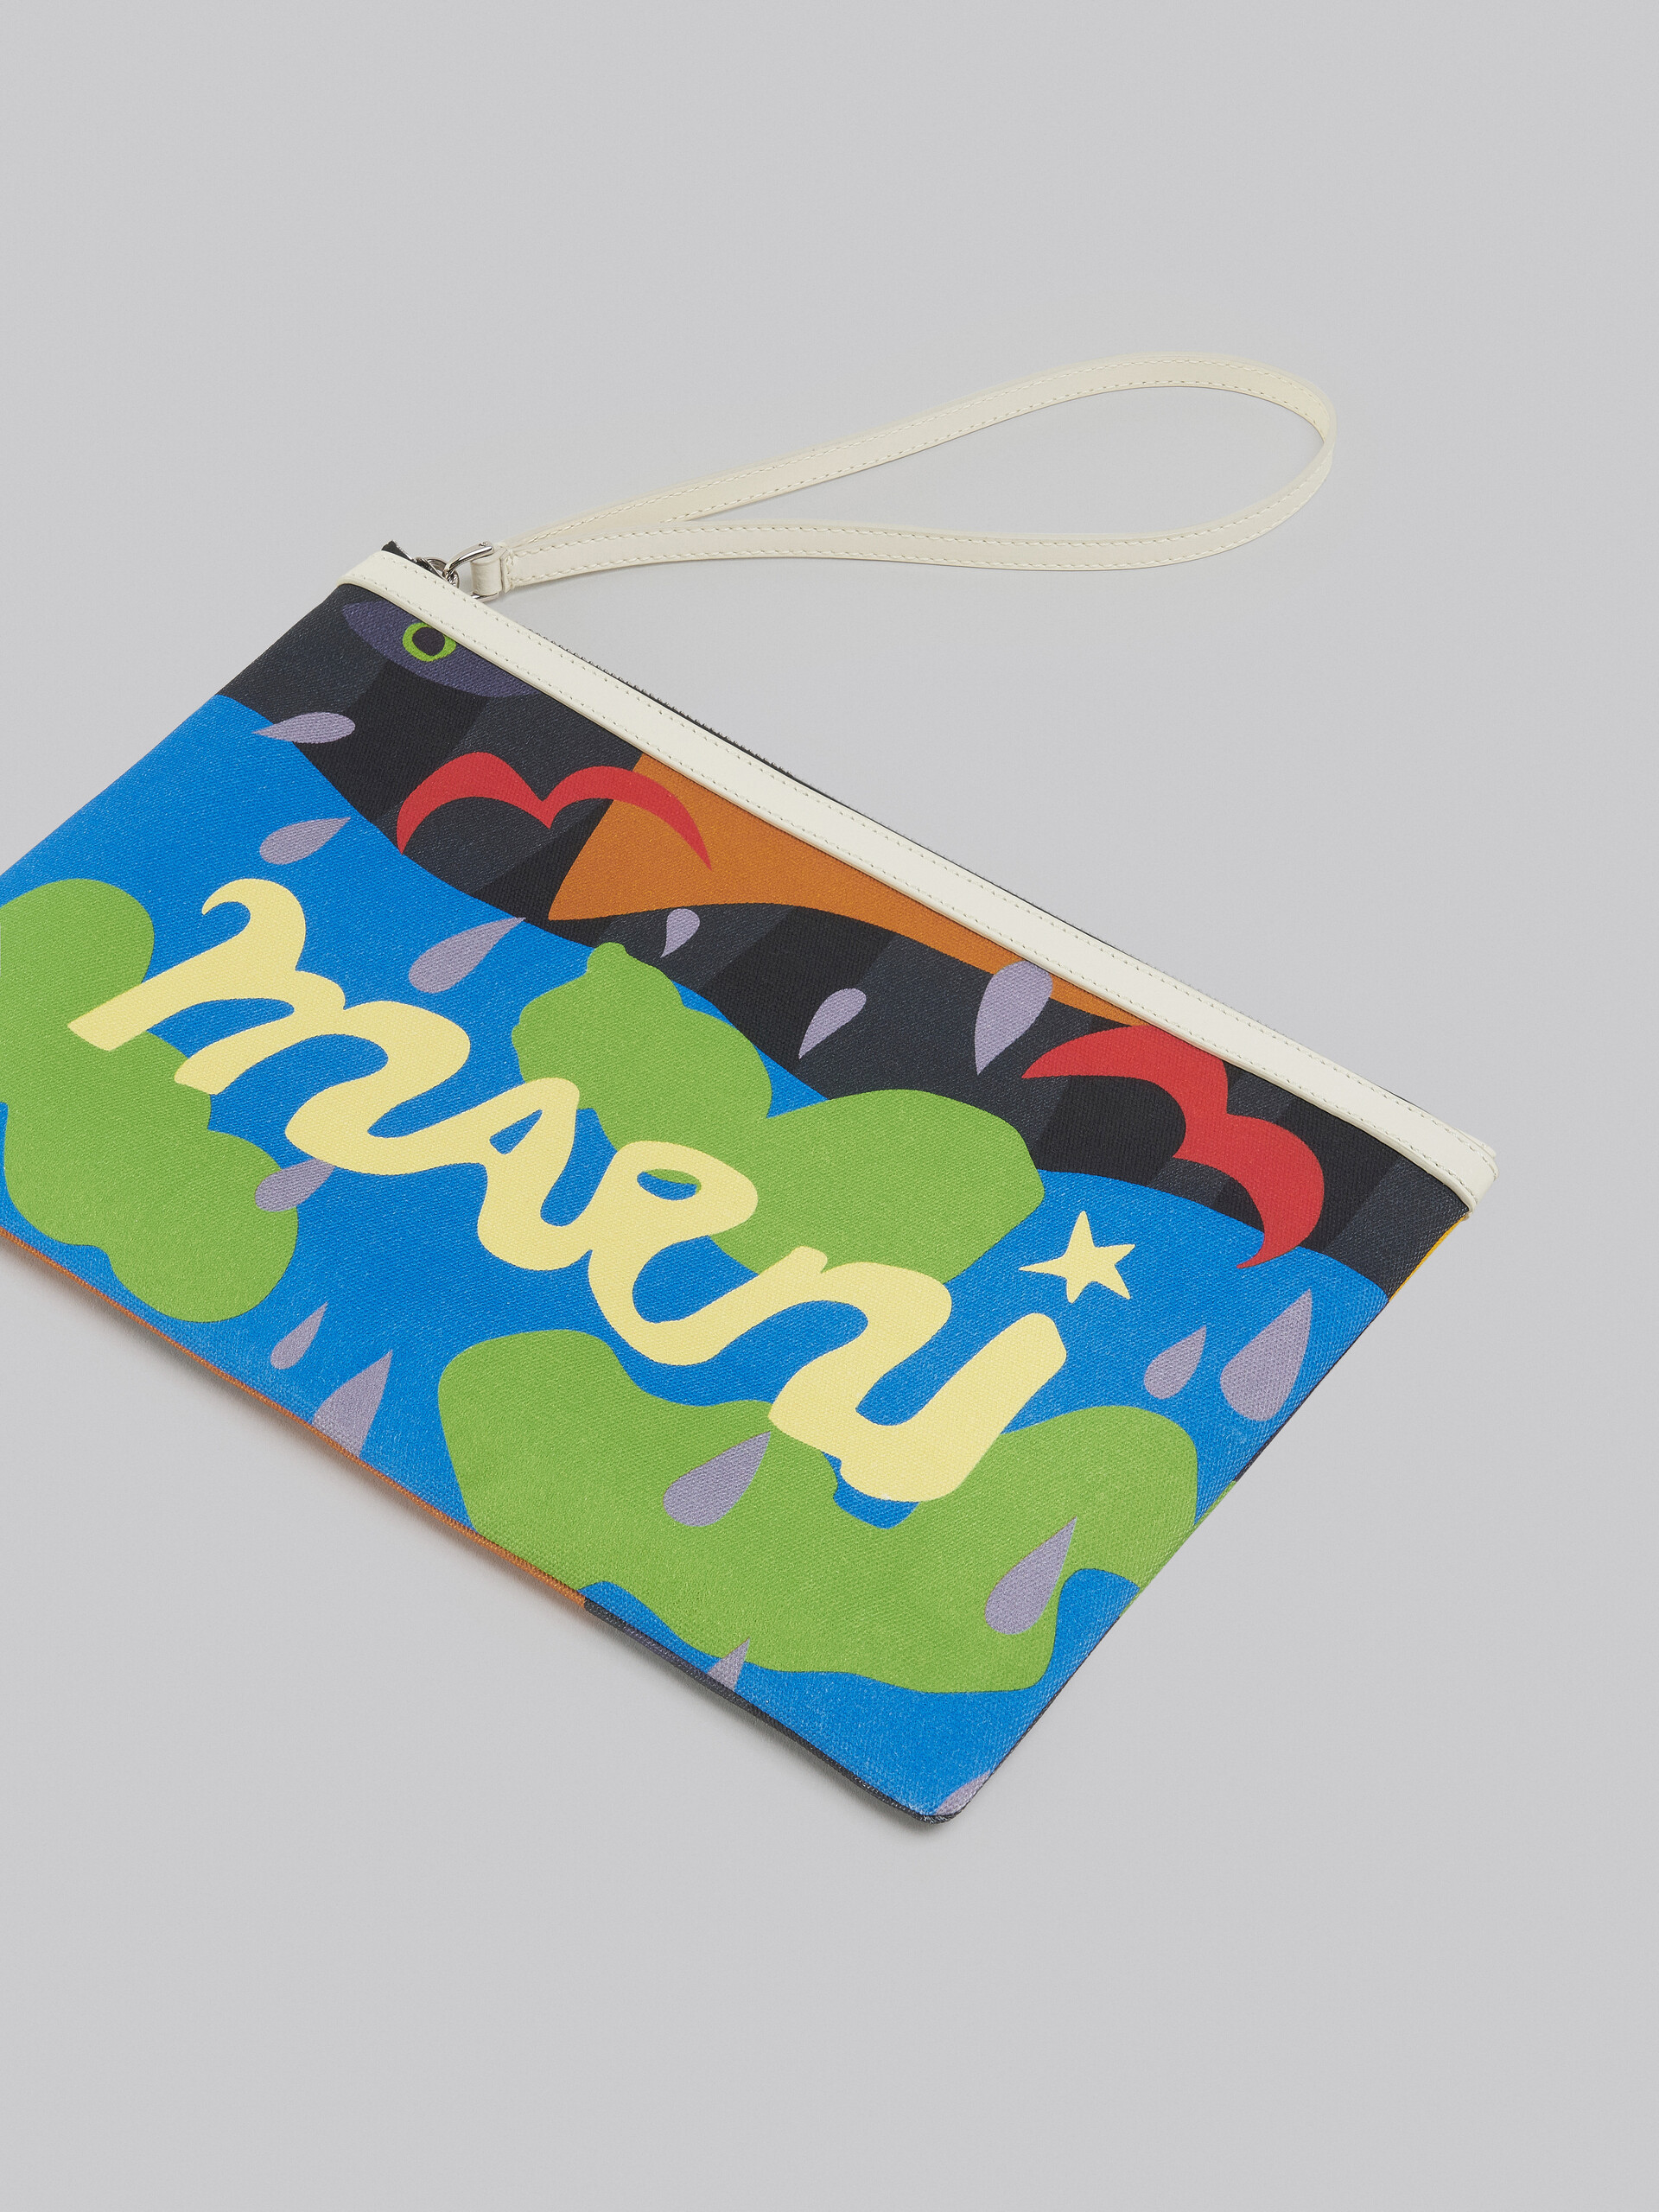 Marni x No Vacancy Inn - Pouch in coated canvas with print - Pochette - Image 5